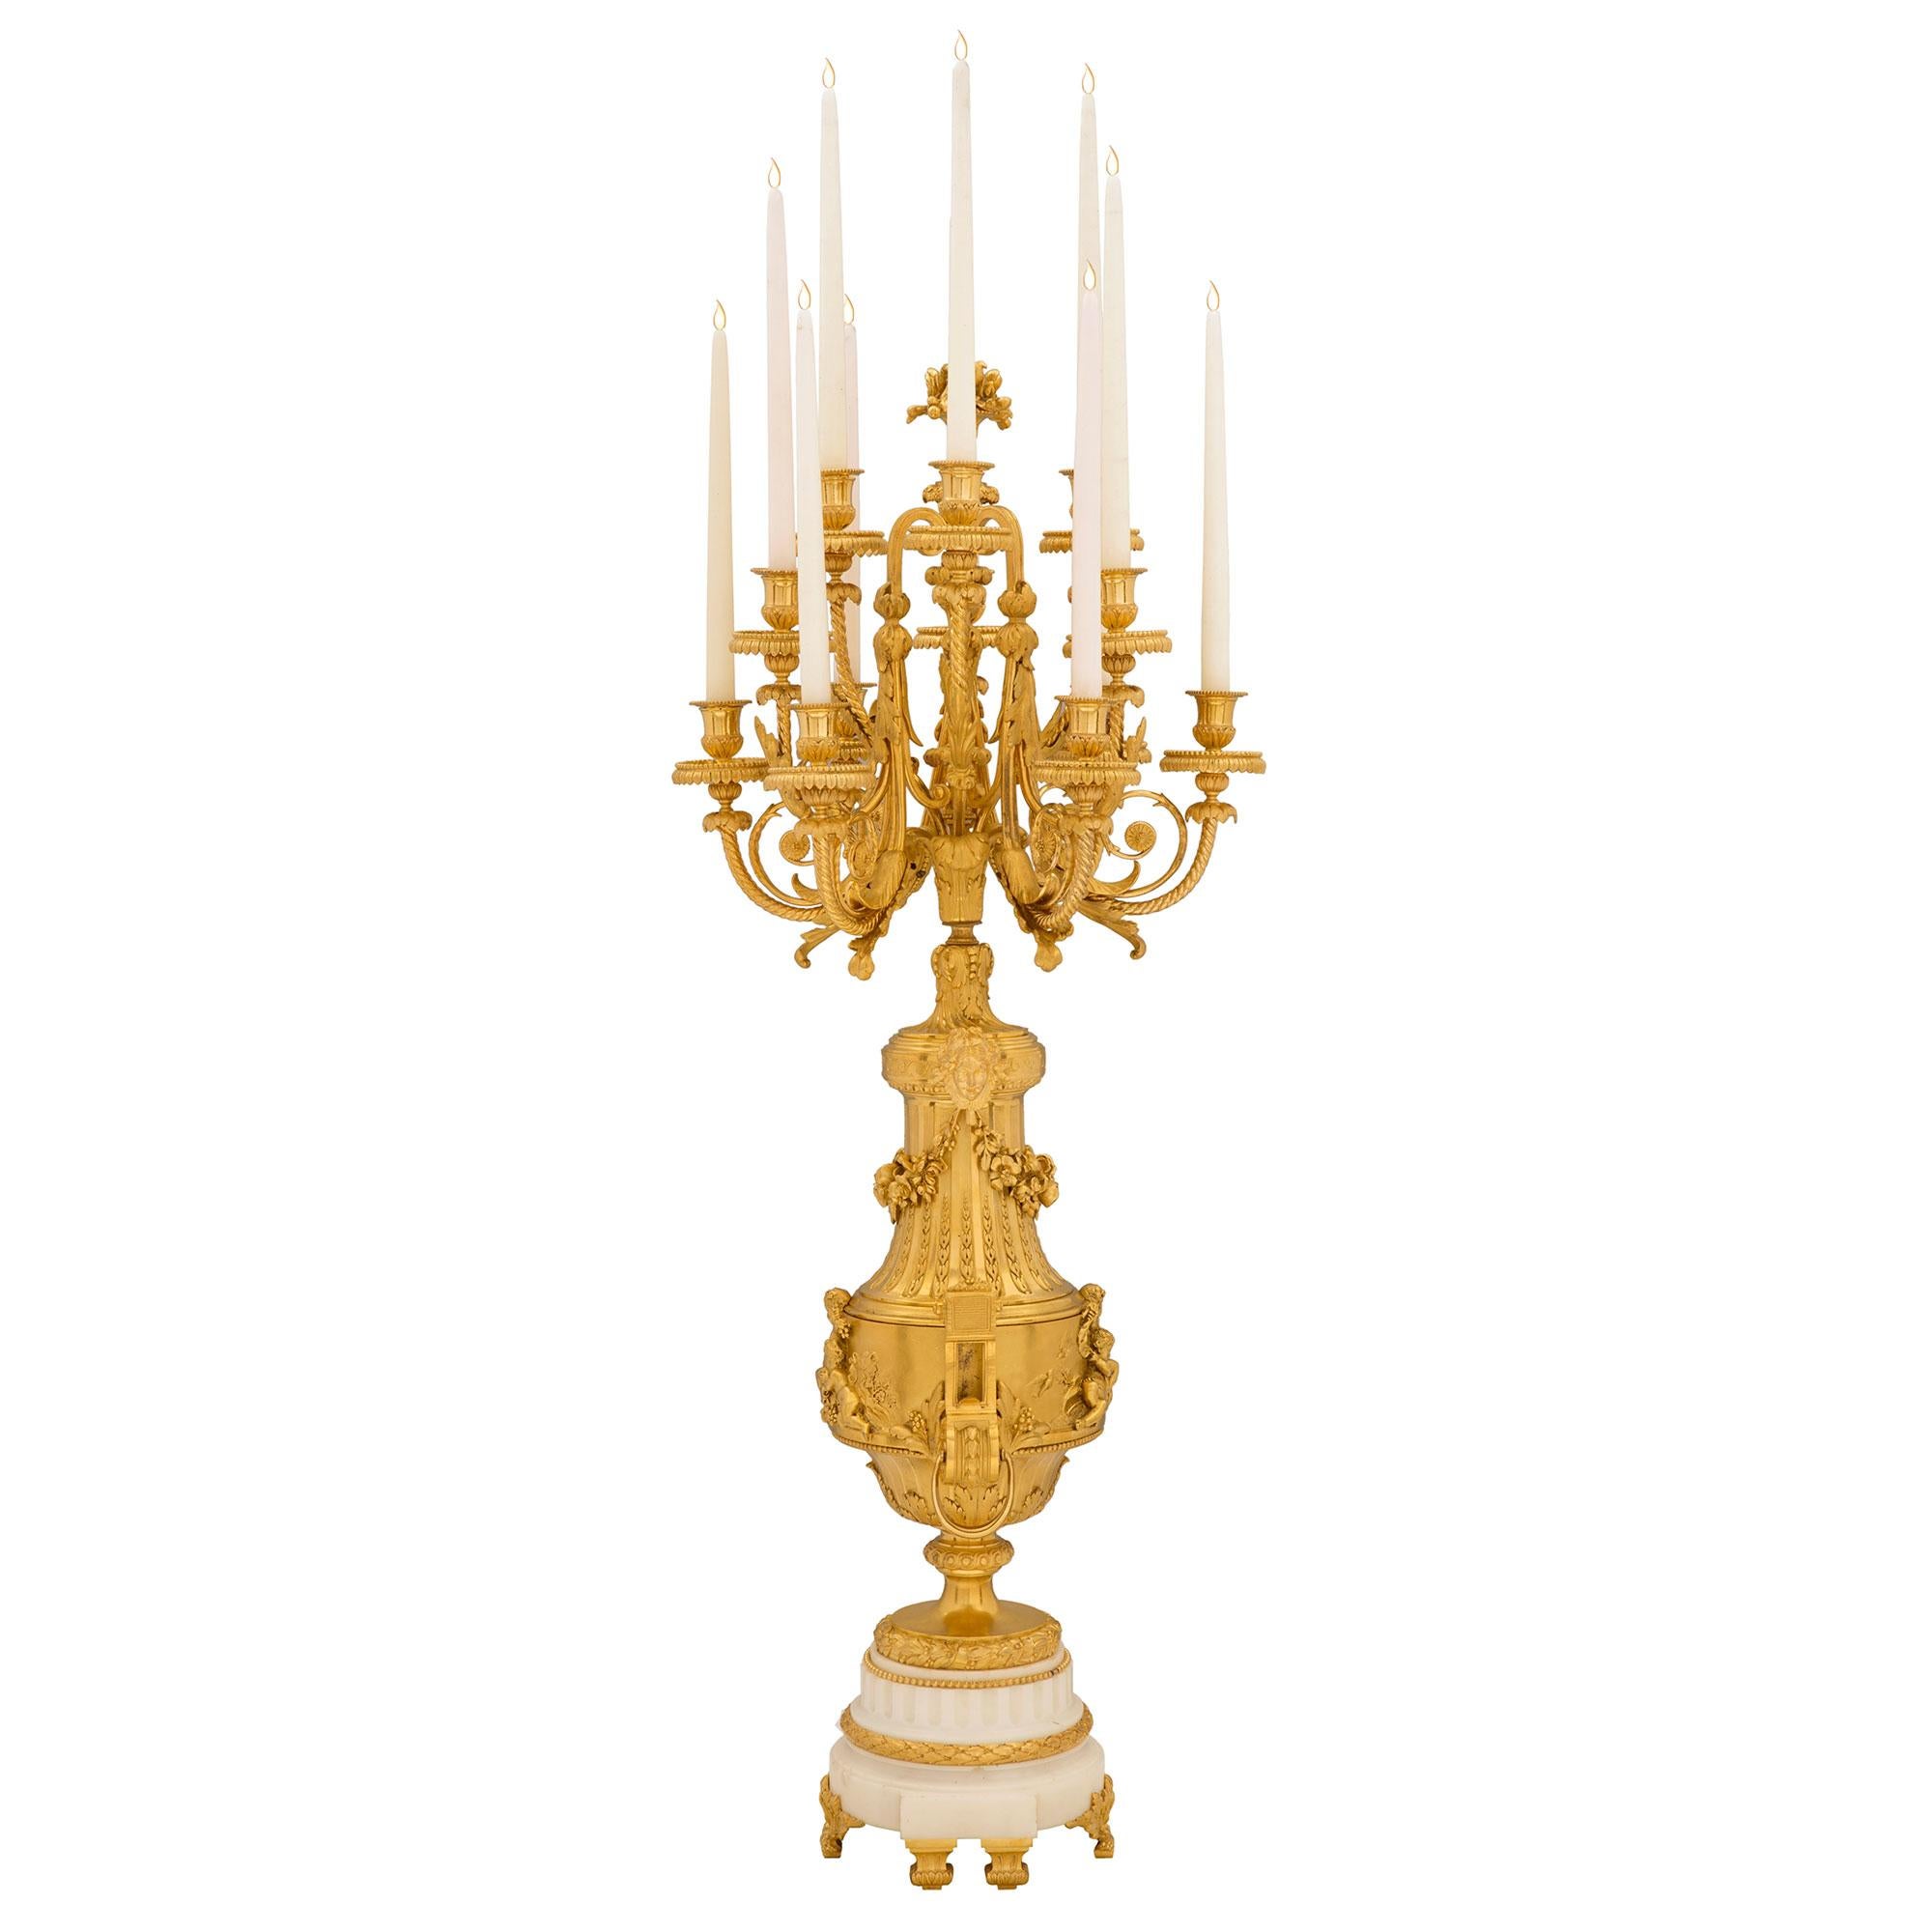 Pair of French 19th Century Ormolu and White Carrara Marble Candelabras In Good Condition For Sale In West Palm Beach, FL